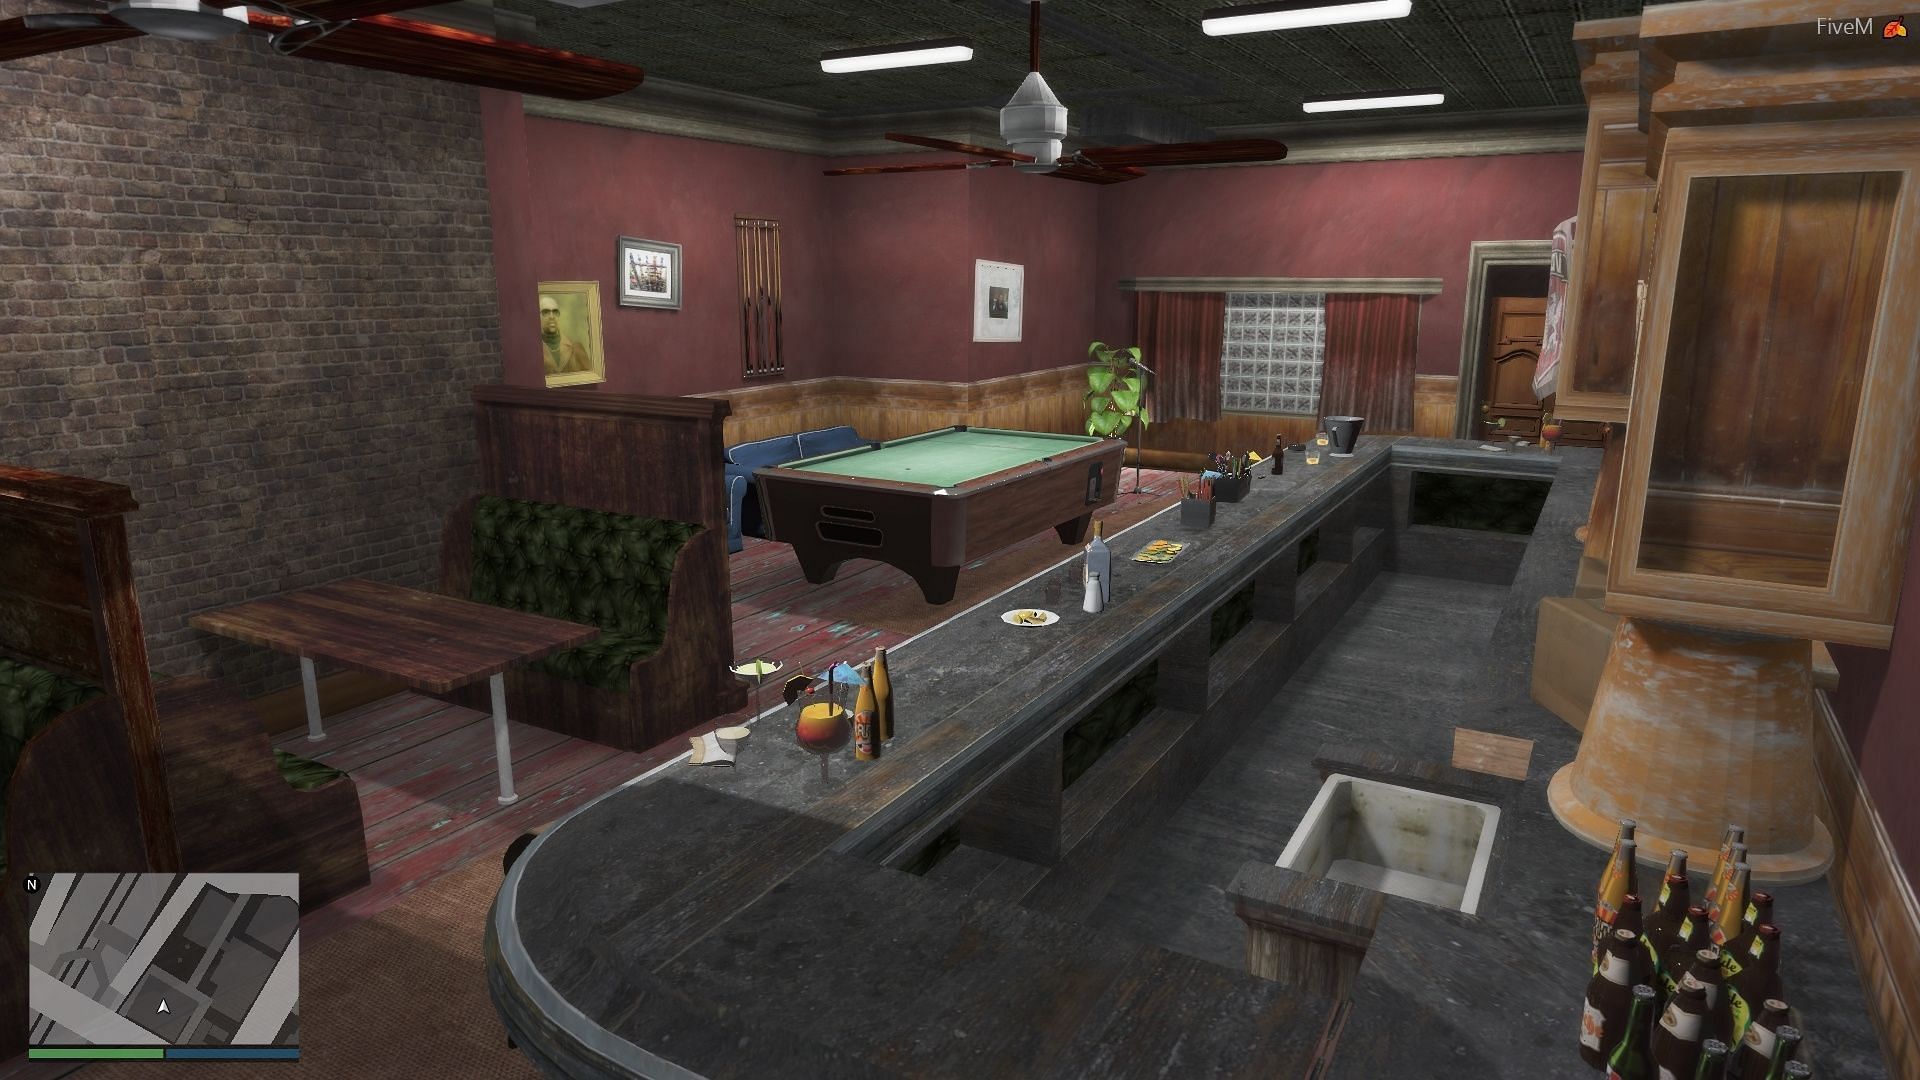 More interiors are always needed in the game (Image via GTA 5 Mods)